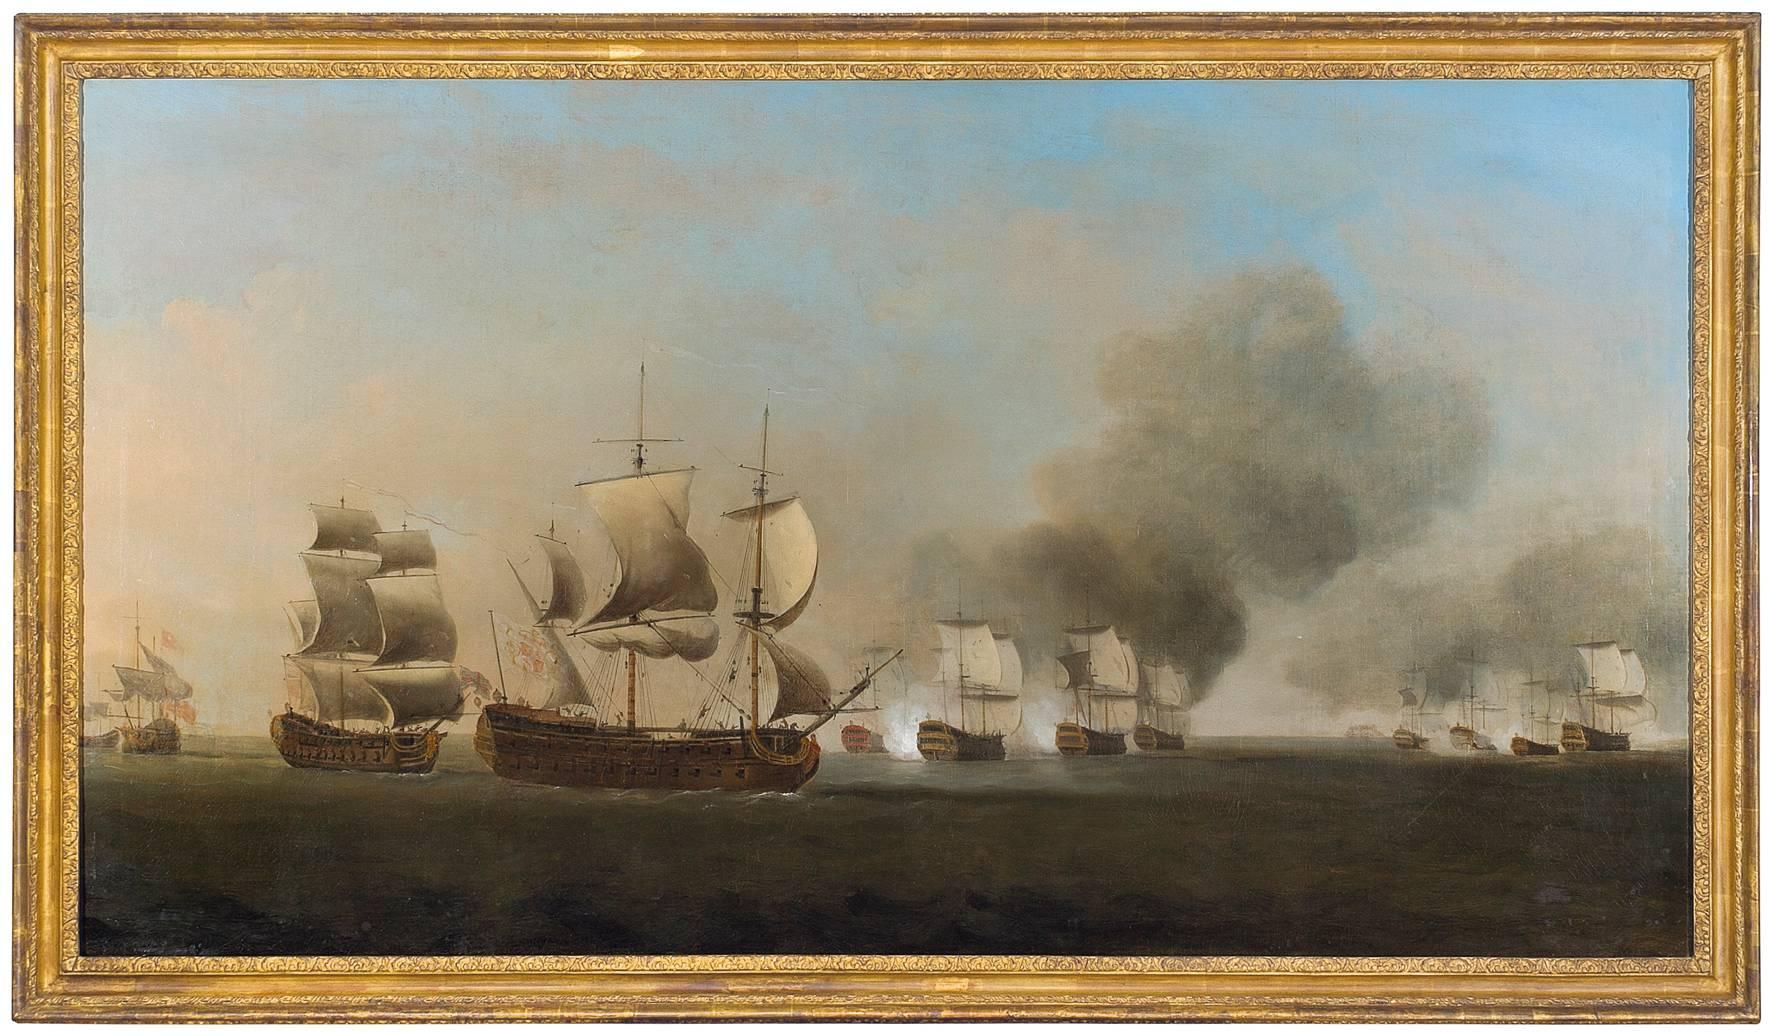 Thomas Craskell Landscape Painting - Admiral Sir Charles Knowles' Jamaica Squadron off the banks of Tortuga